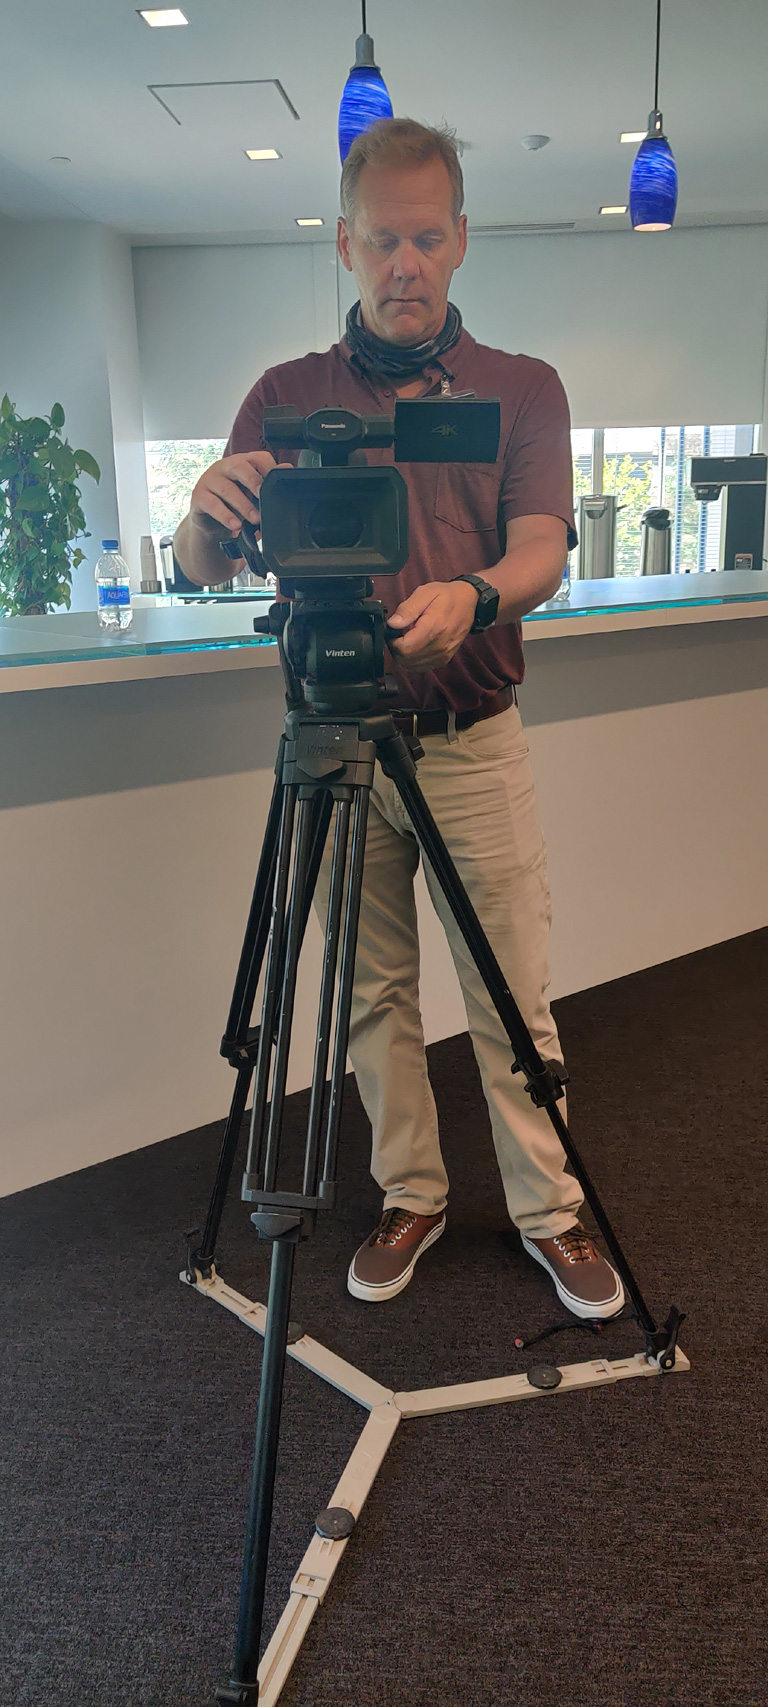 MTI videographer Shawn Chadwick sets up the first Panasonic AGDVX 200 camera for the interview.